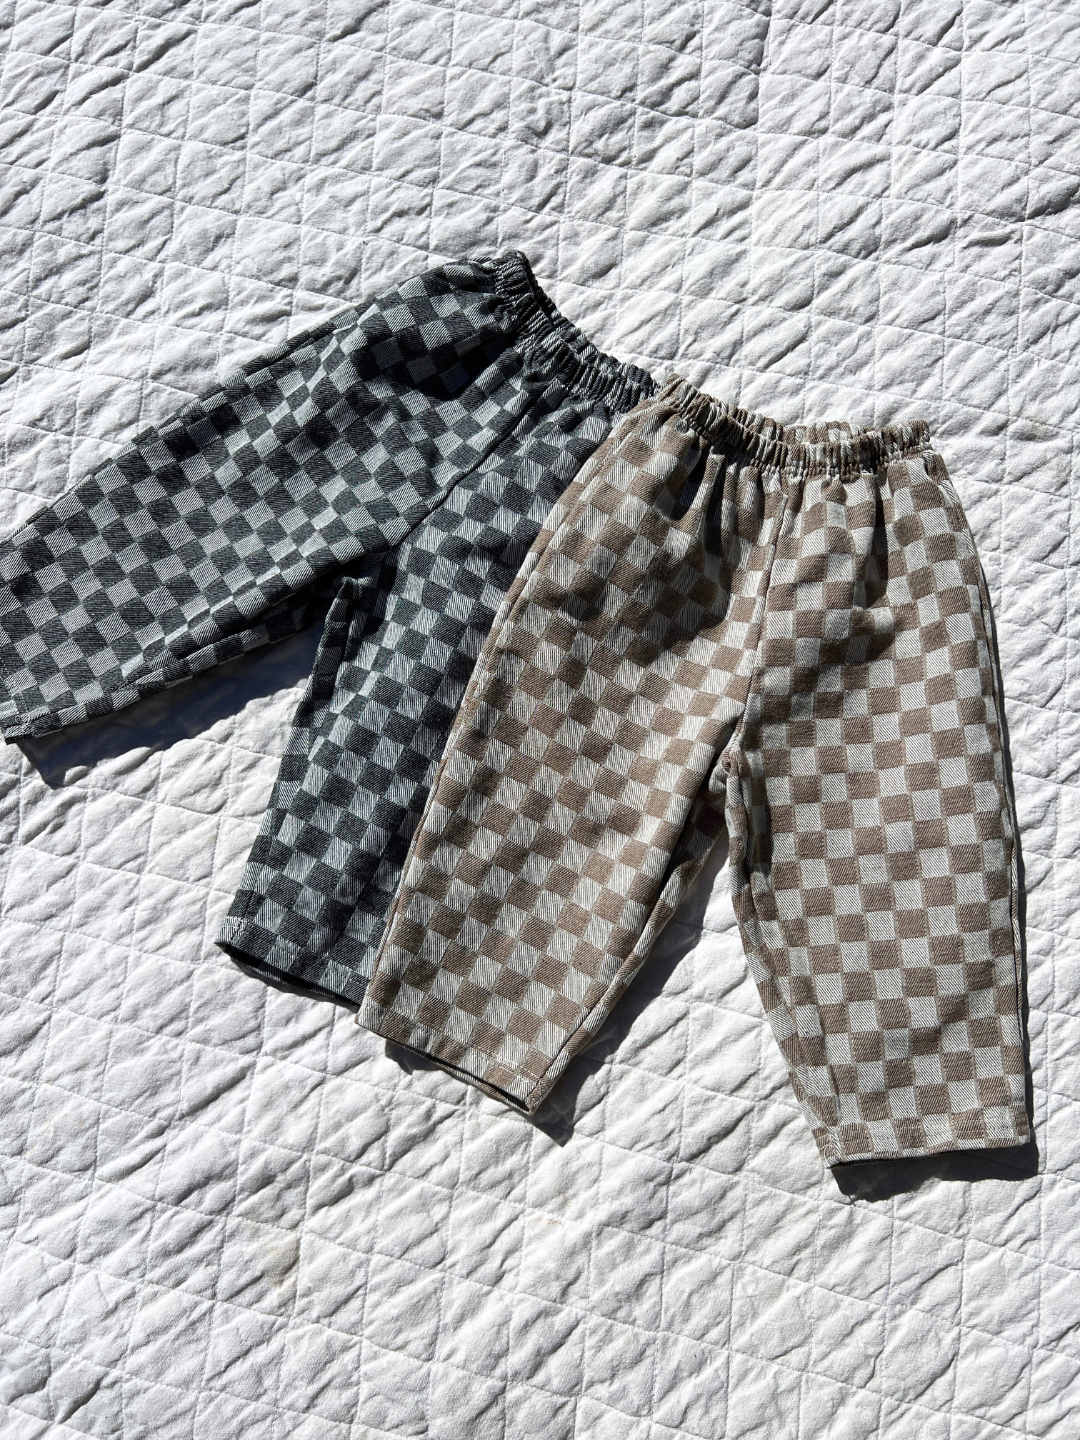 Stone & Charcoal Chess Club Pants laid on blanket